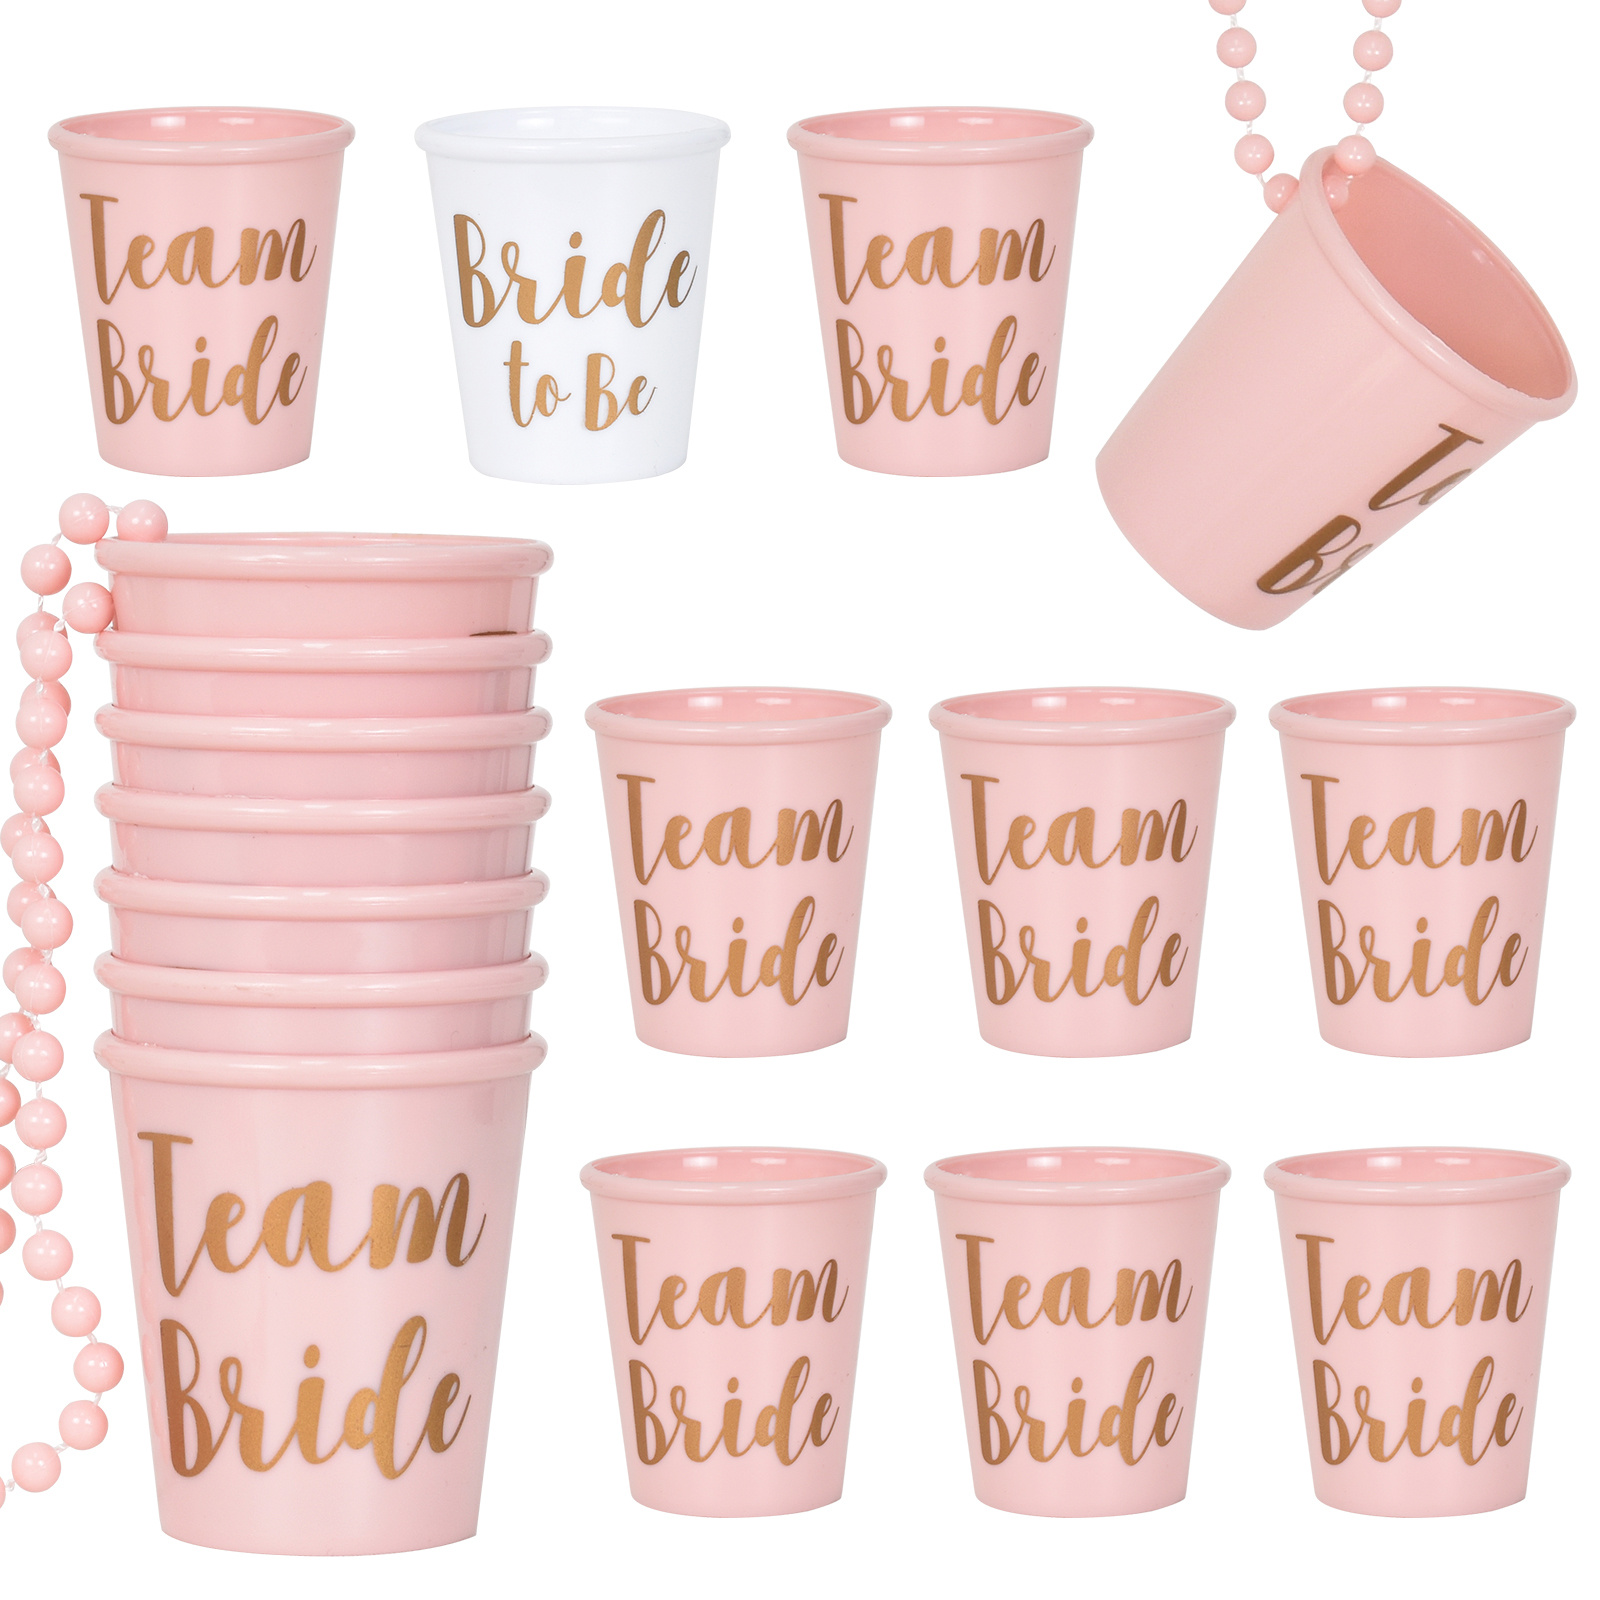 

14pcs, Team Bride And Bride Plastic Beaded Bridal Shot Glass, Necklace Pink And White, Bachelor Party Chain Wine Cup Necklace, Groom And Bride Shot Glasses For Wedding Party Hen Party